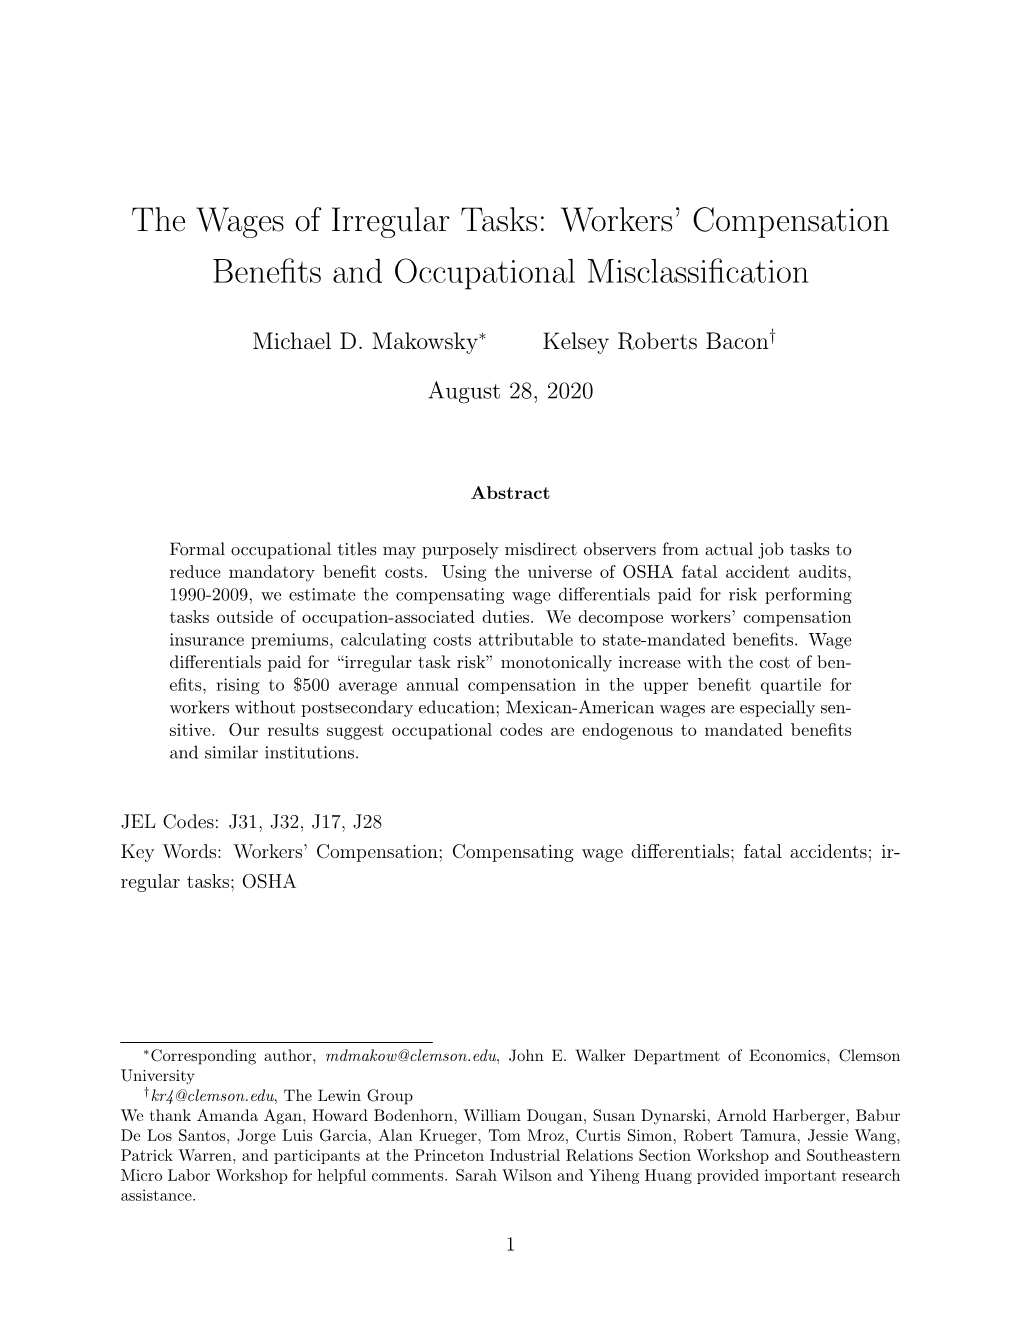 The Wages of Irregular Tasks: Workers' Compensation Benefits and Occupational Misclassification